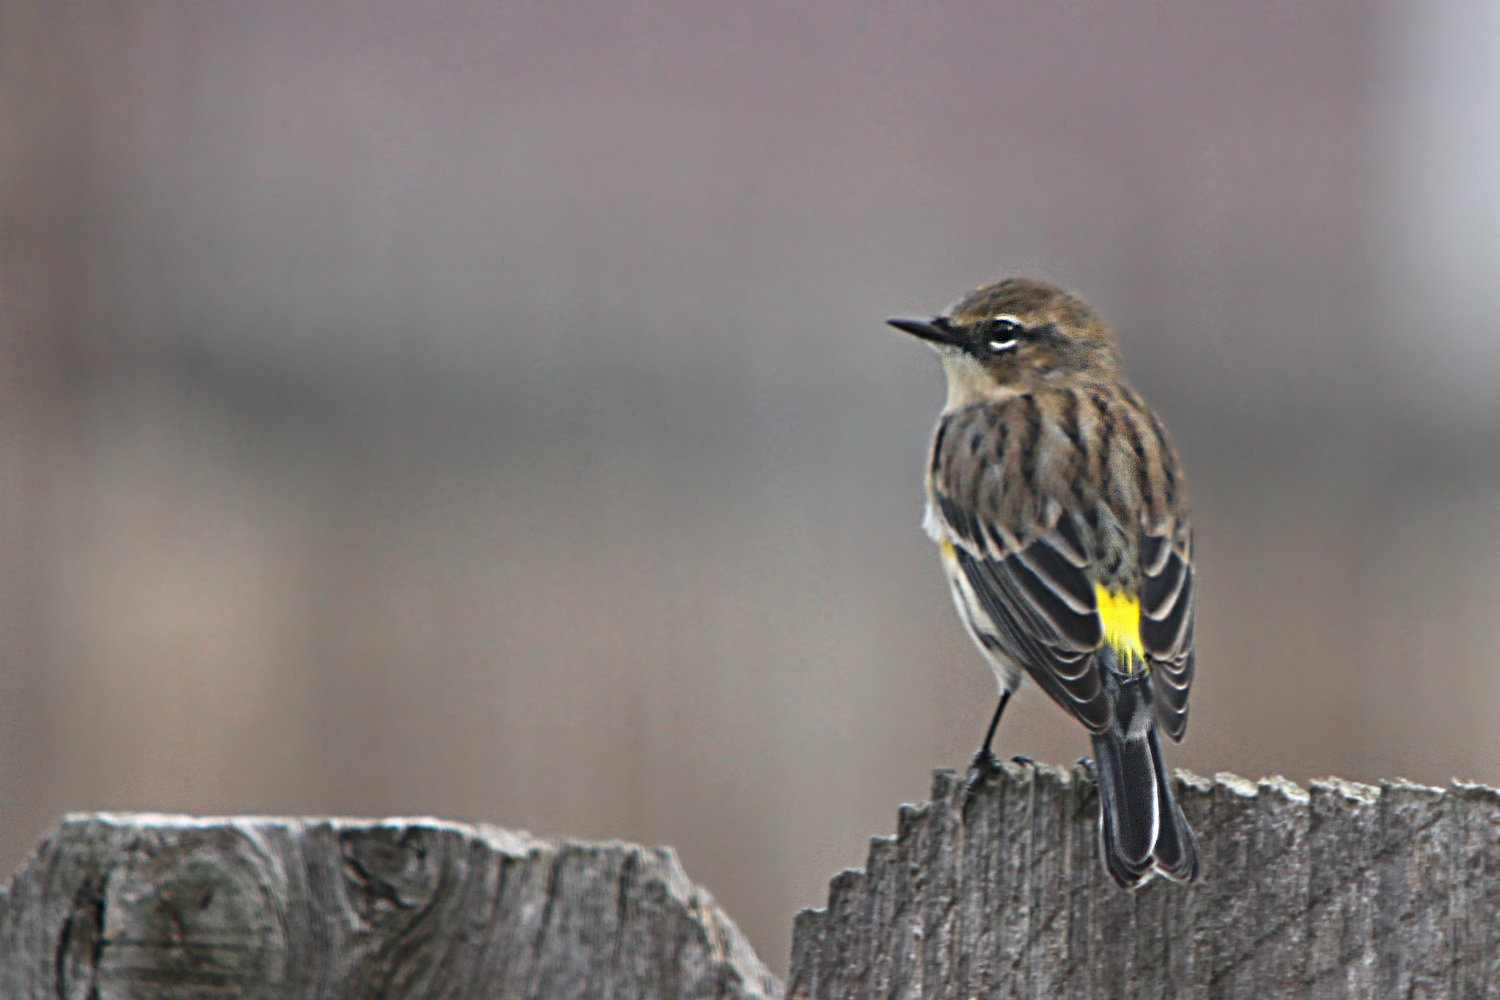 Yellow-rumped Warbler; showing off that characteristic yellow rump!